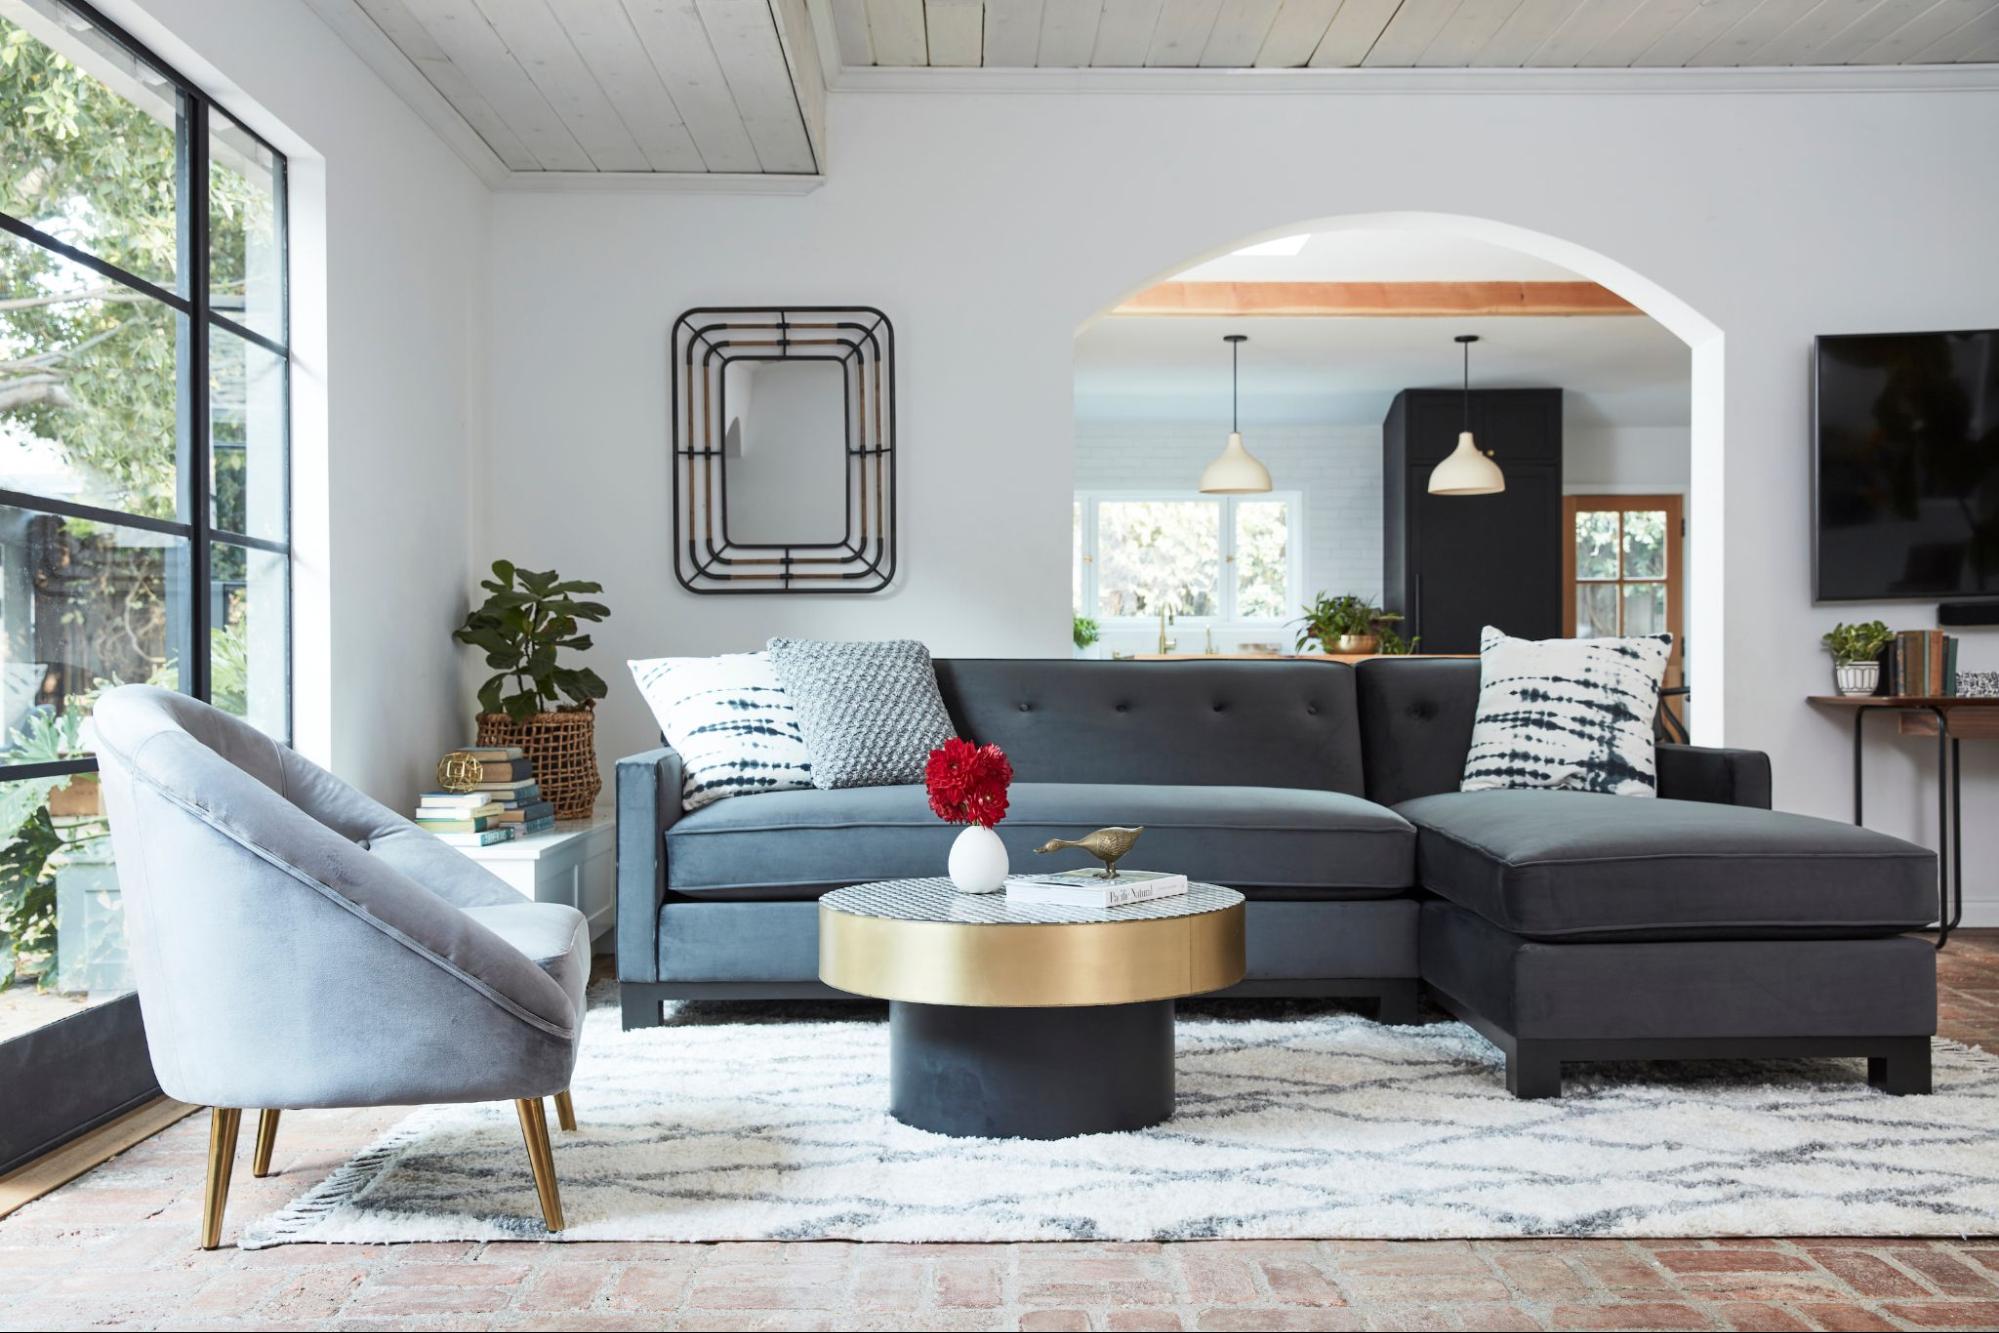 A dark grey sofa with a grey loveseat backdropped by a living room setting 